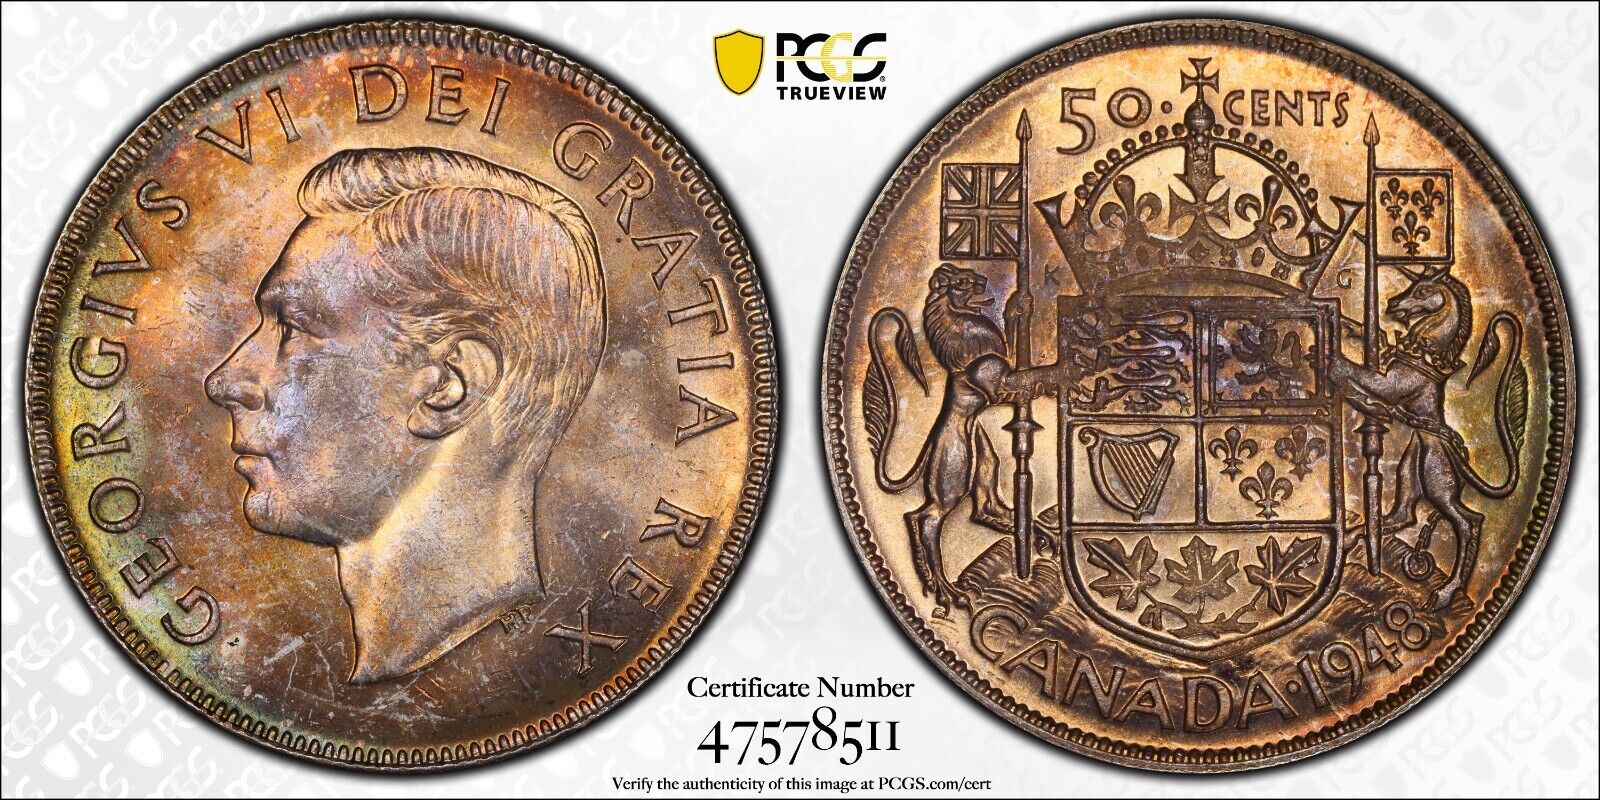 Toned Silver 1948 Canada 50 Cents Half Dollar | PCGS MS63 Narrow Date